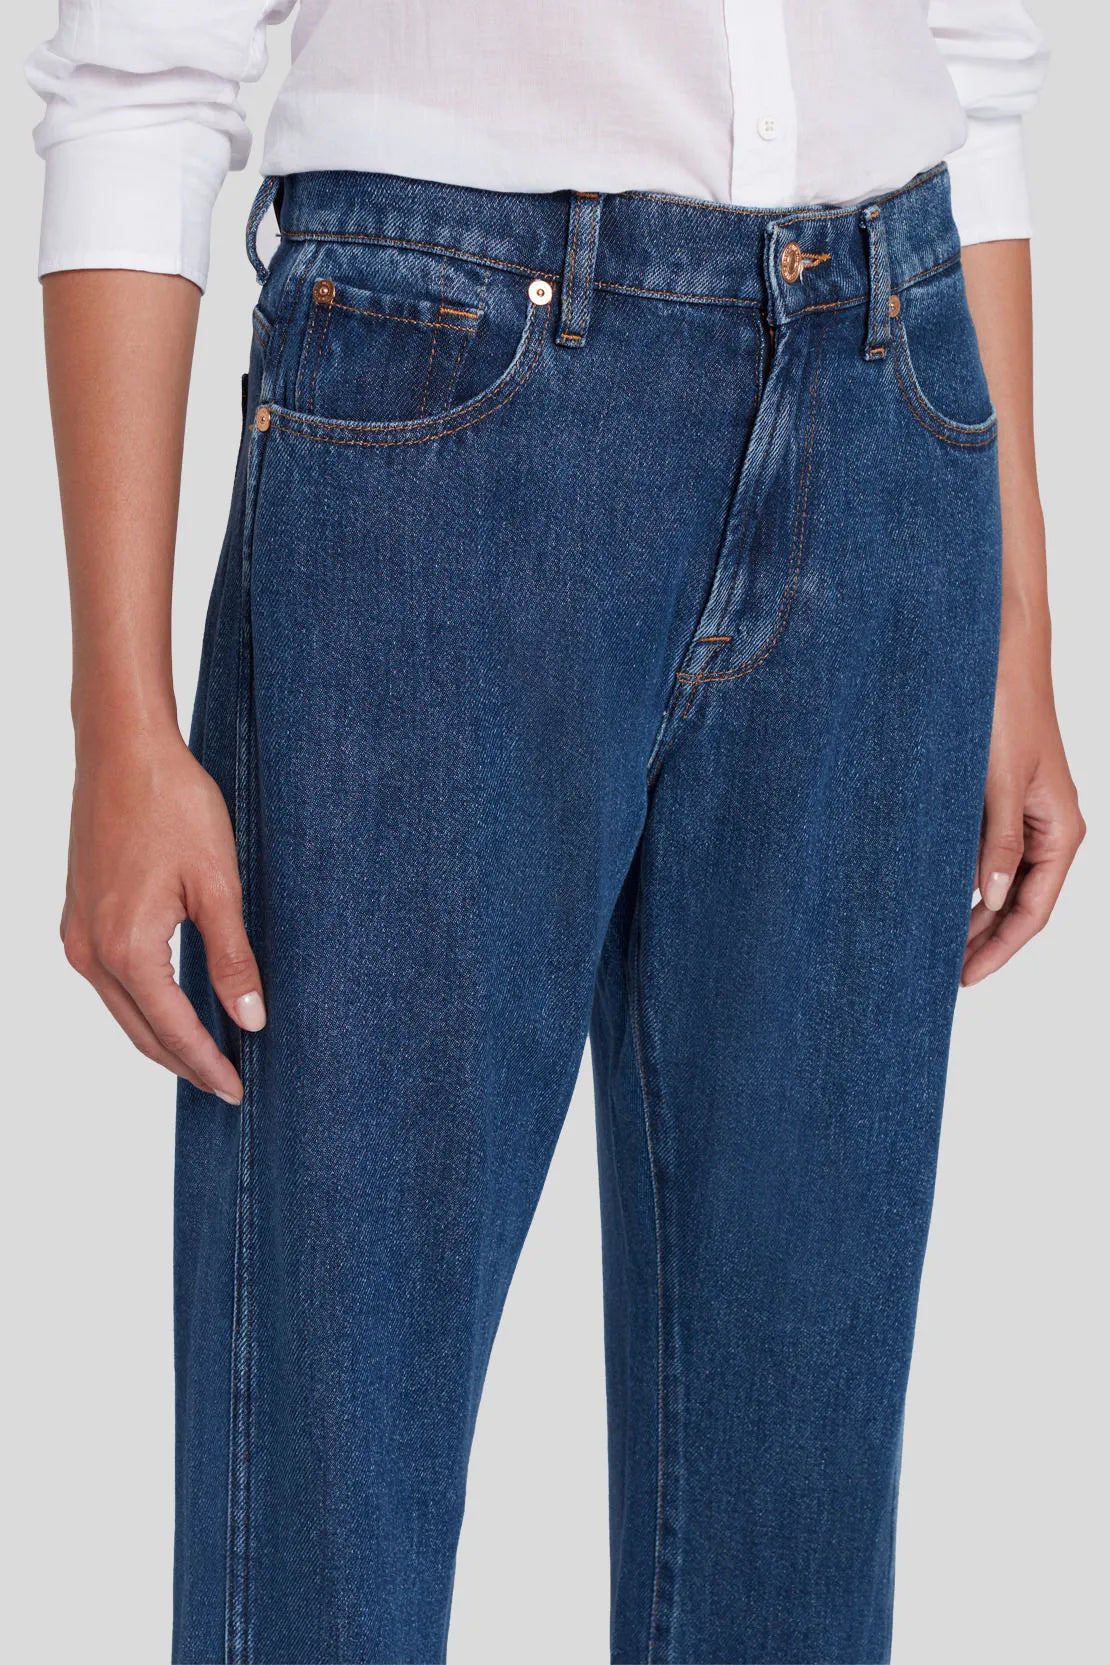 Jeans Tess Dolly in Mid Blue7 For All Mankind - Anita Hass